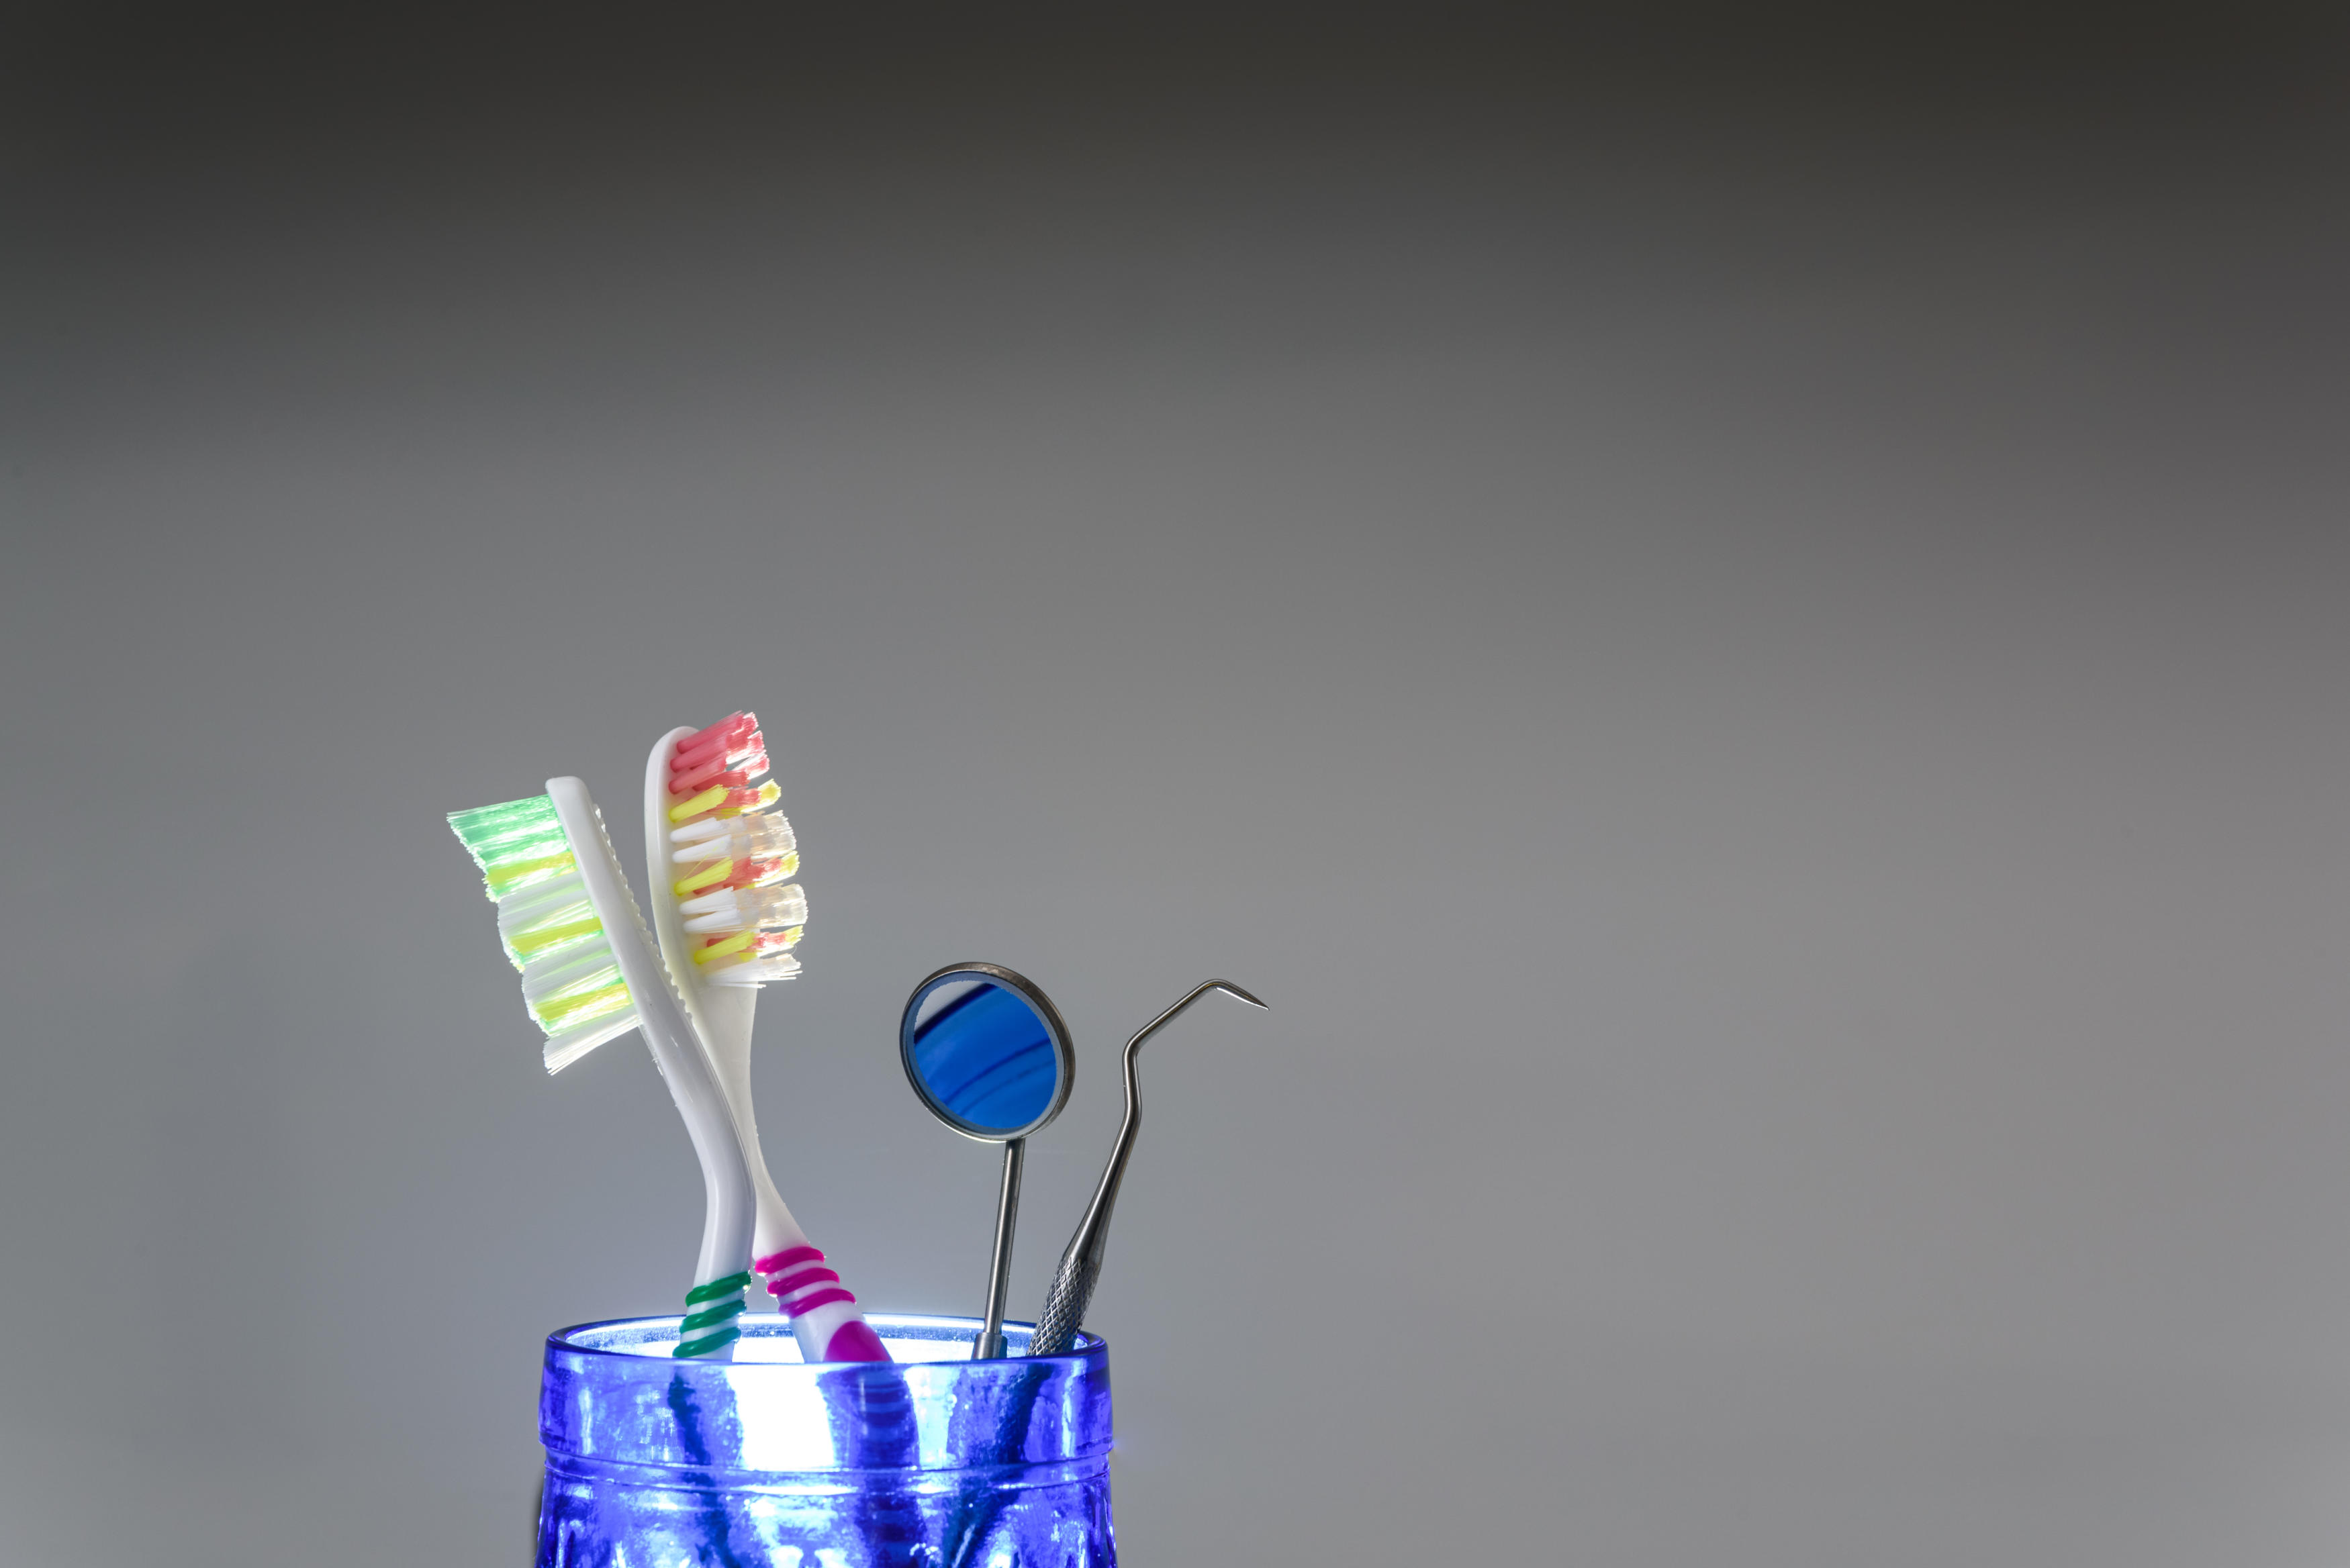 toothbrushes and dentist set isolated on gray back 2022 05 03 22 33 50 utc 2 scaled